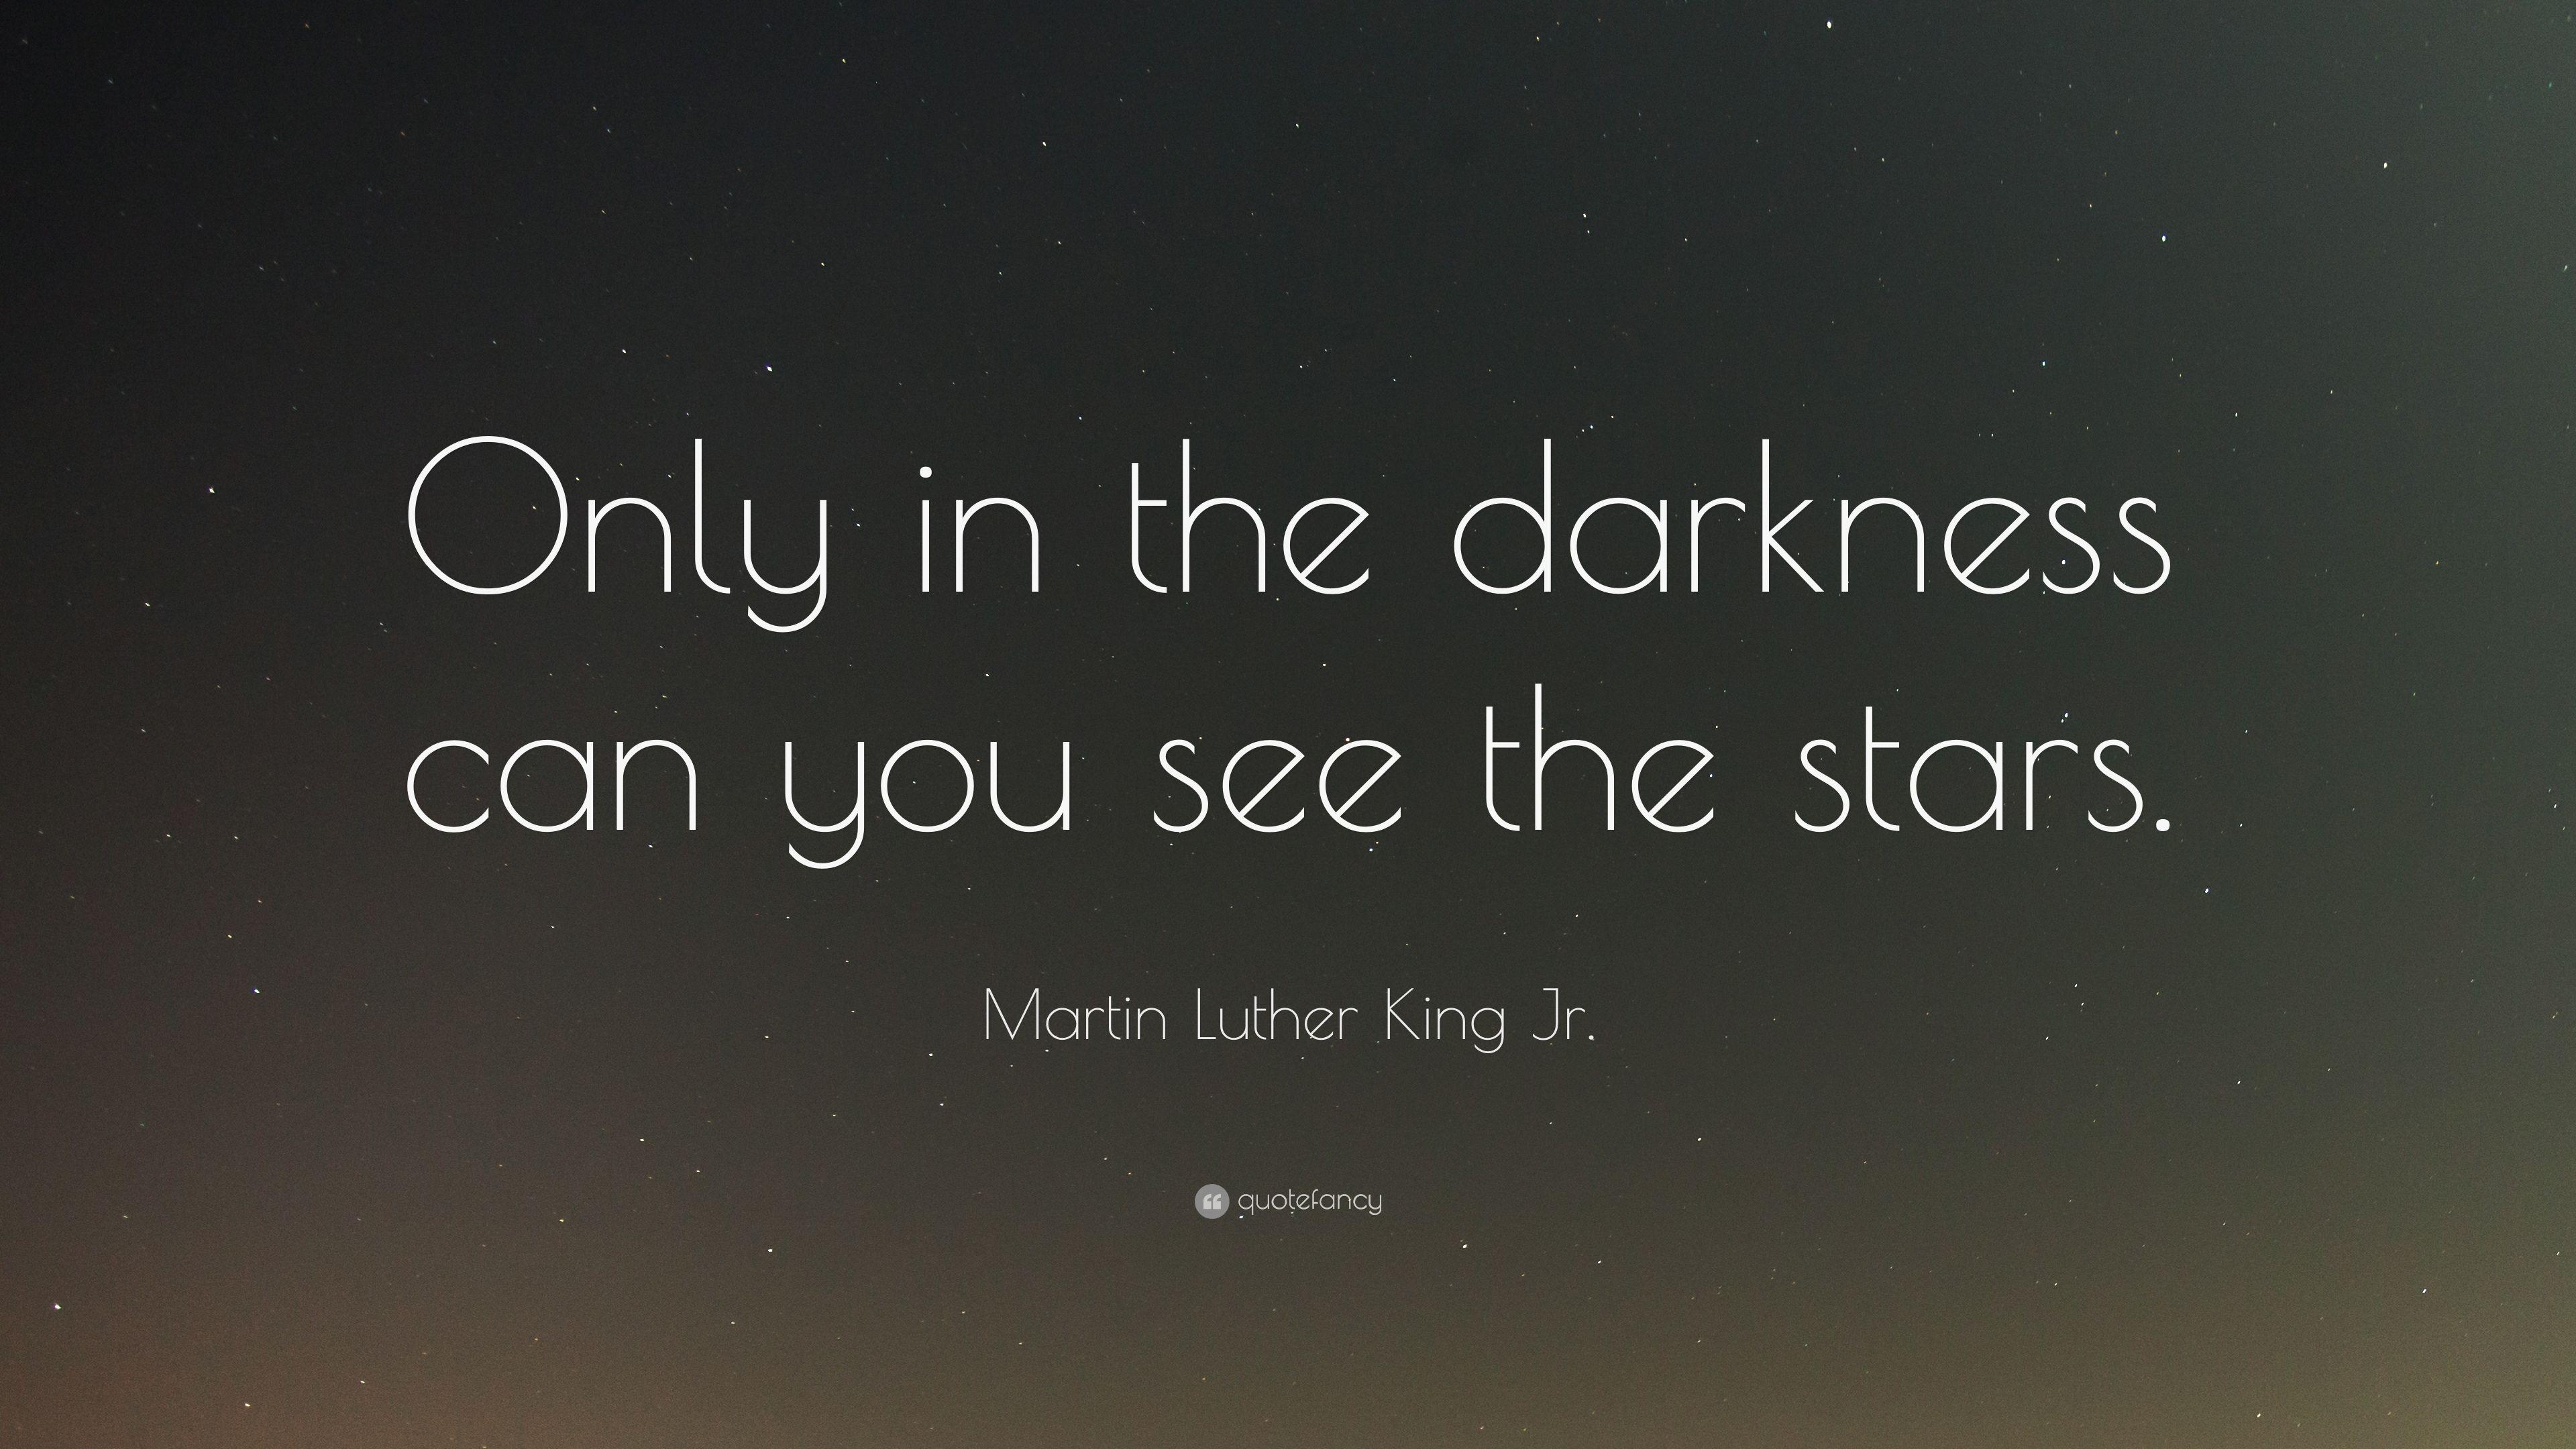 Martin Luther King Jr. Quotes (2022 Update)